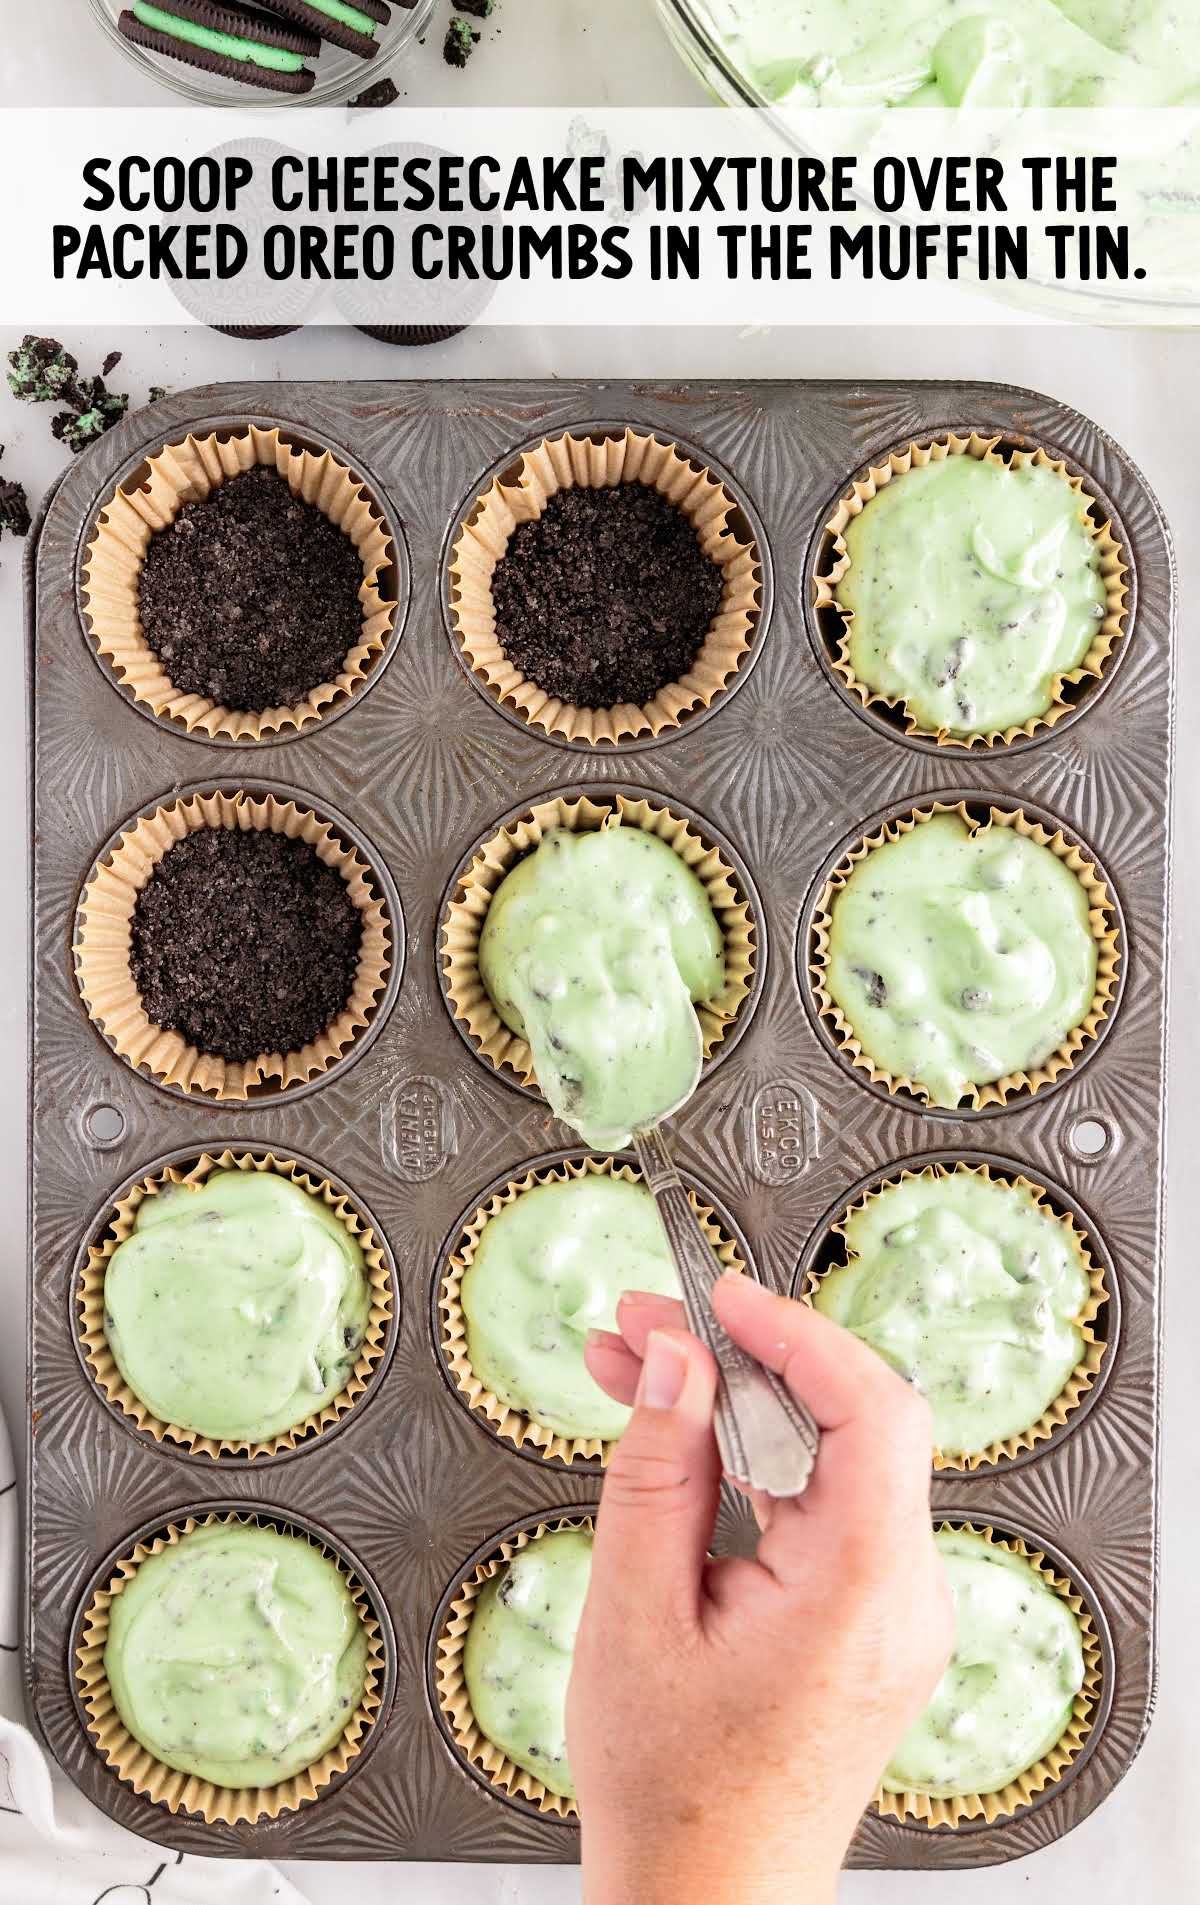 cheesecake mixture scooped over the oreo crumbs in the muffin tin